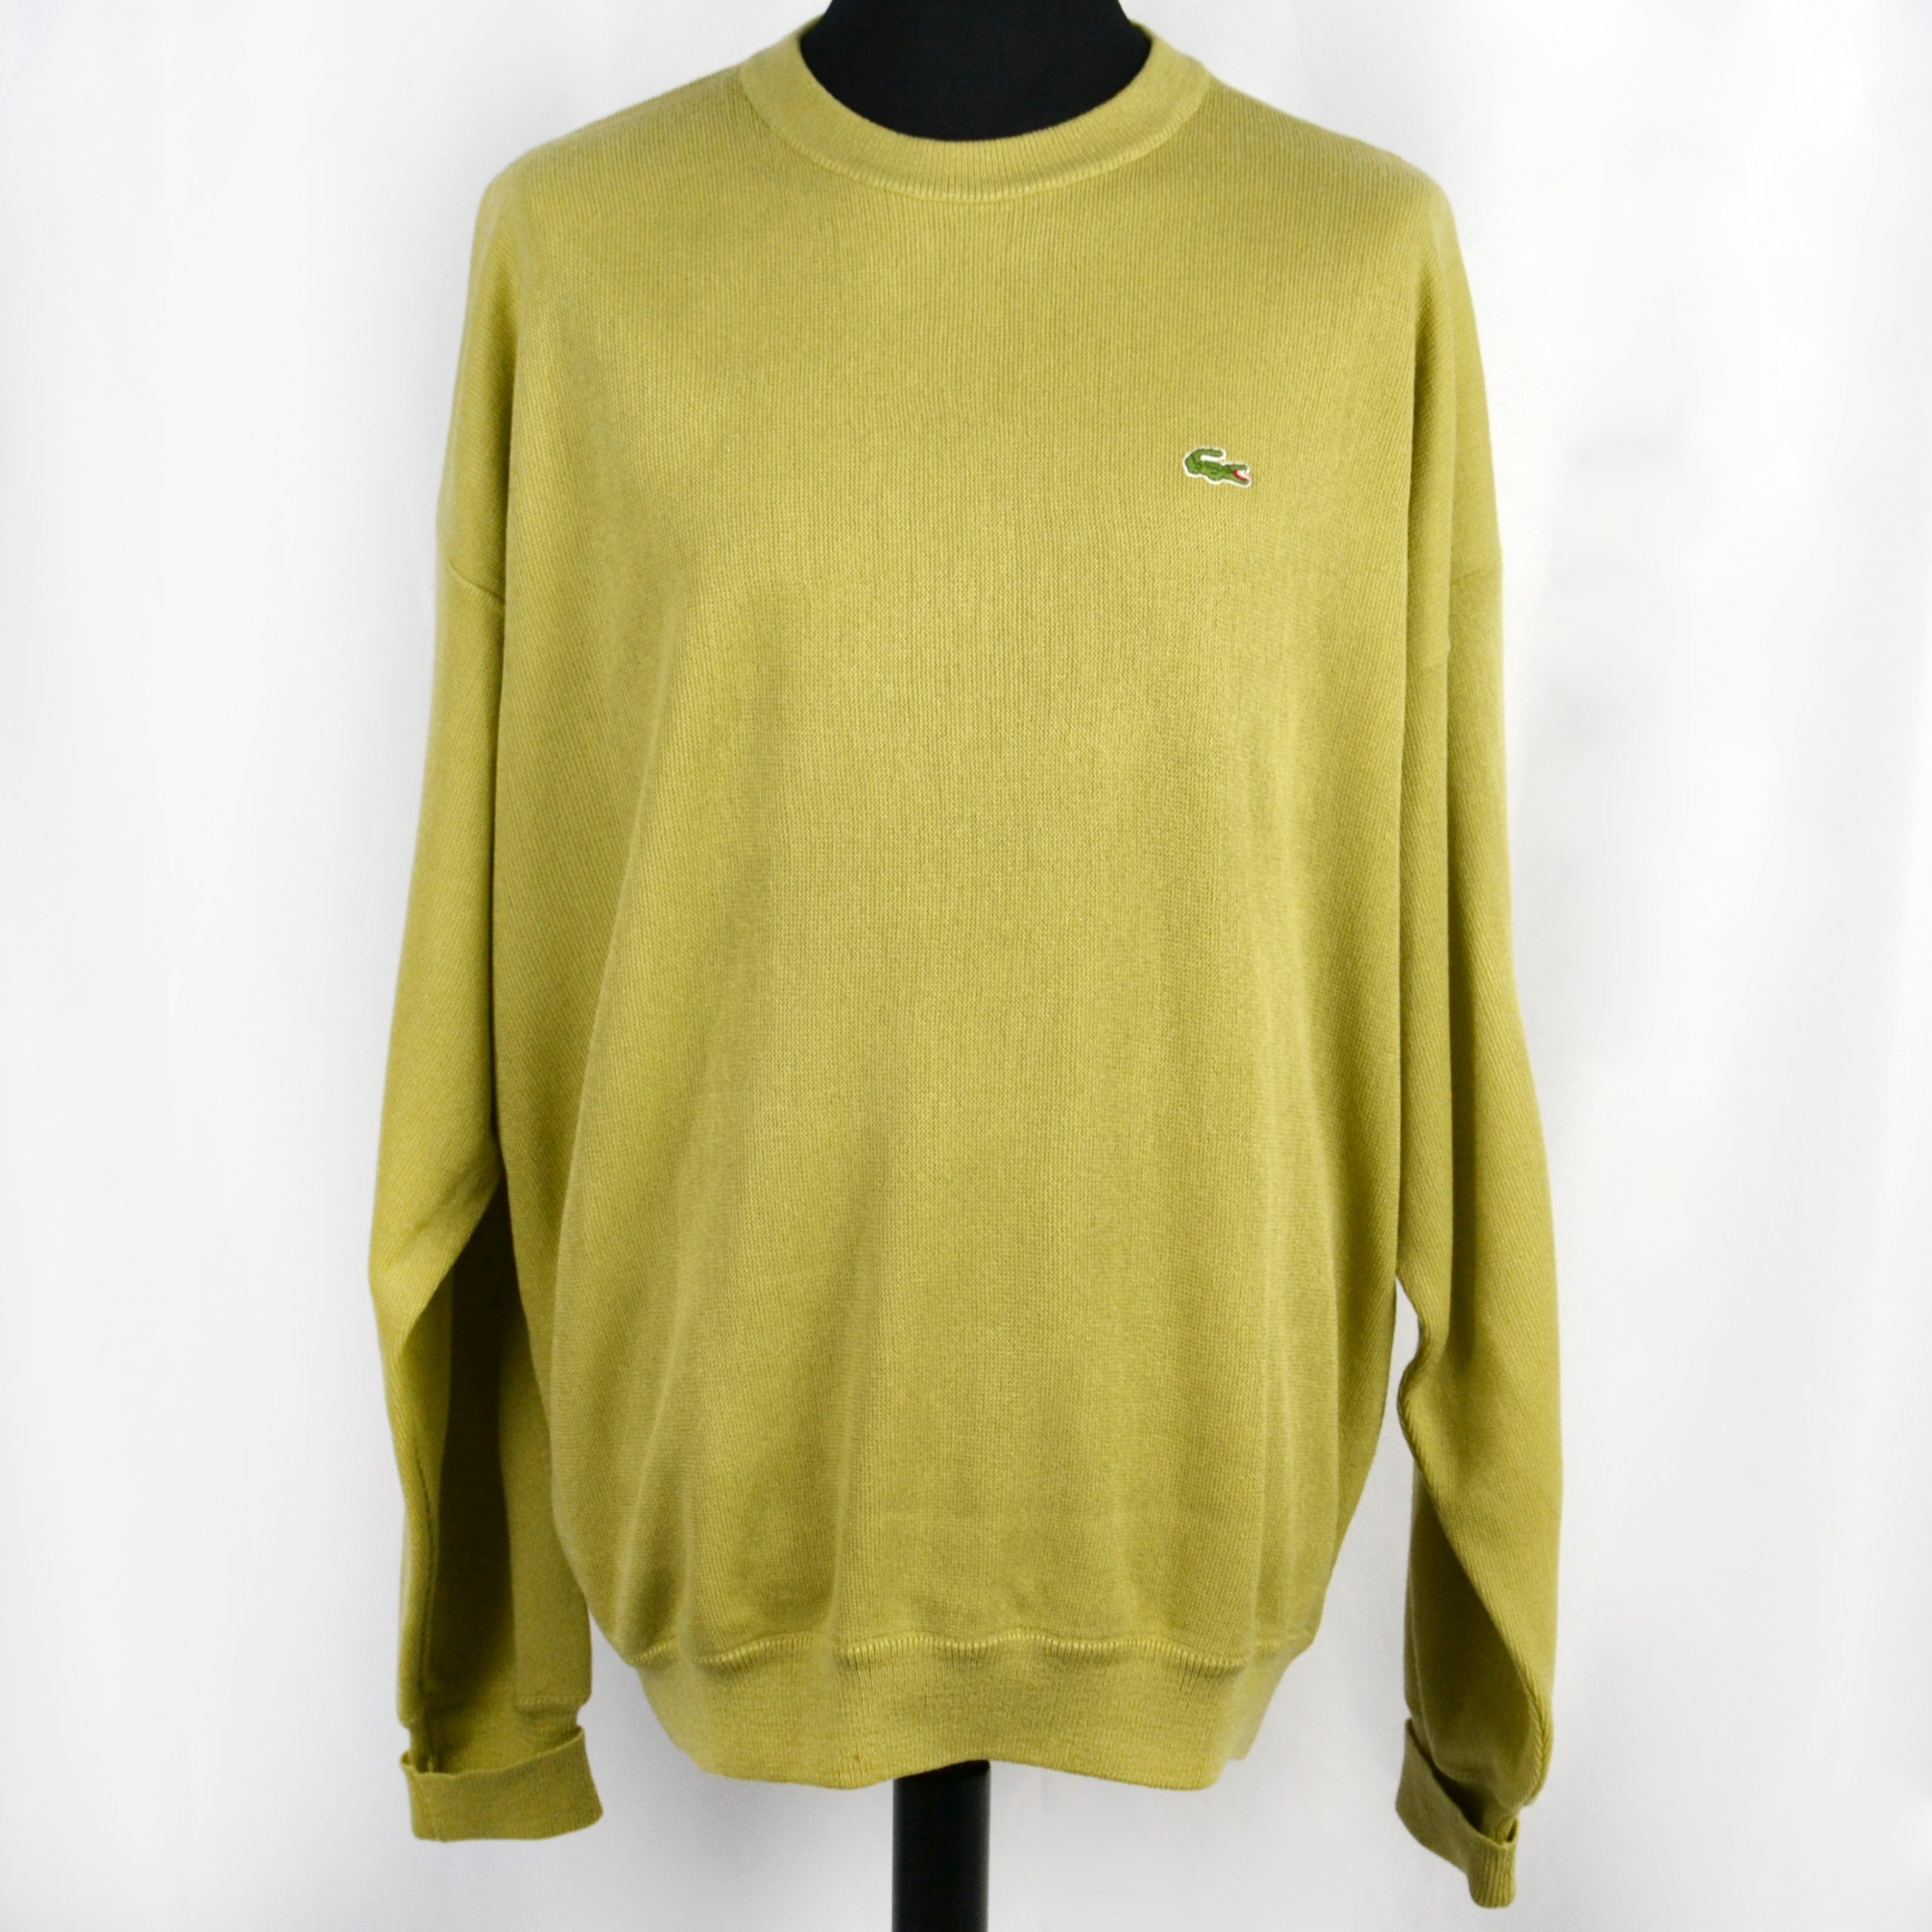 Jersey / Sweater / Lacoste - Magpie Vintage